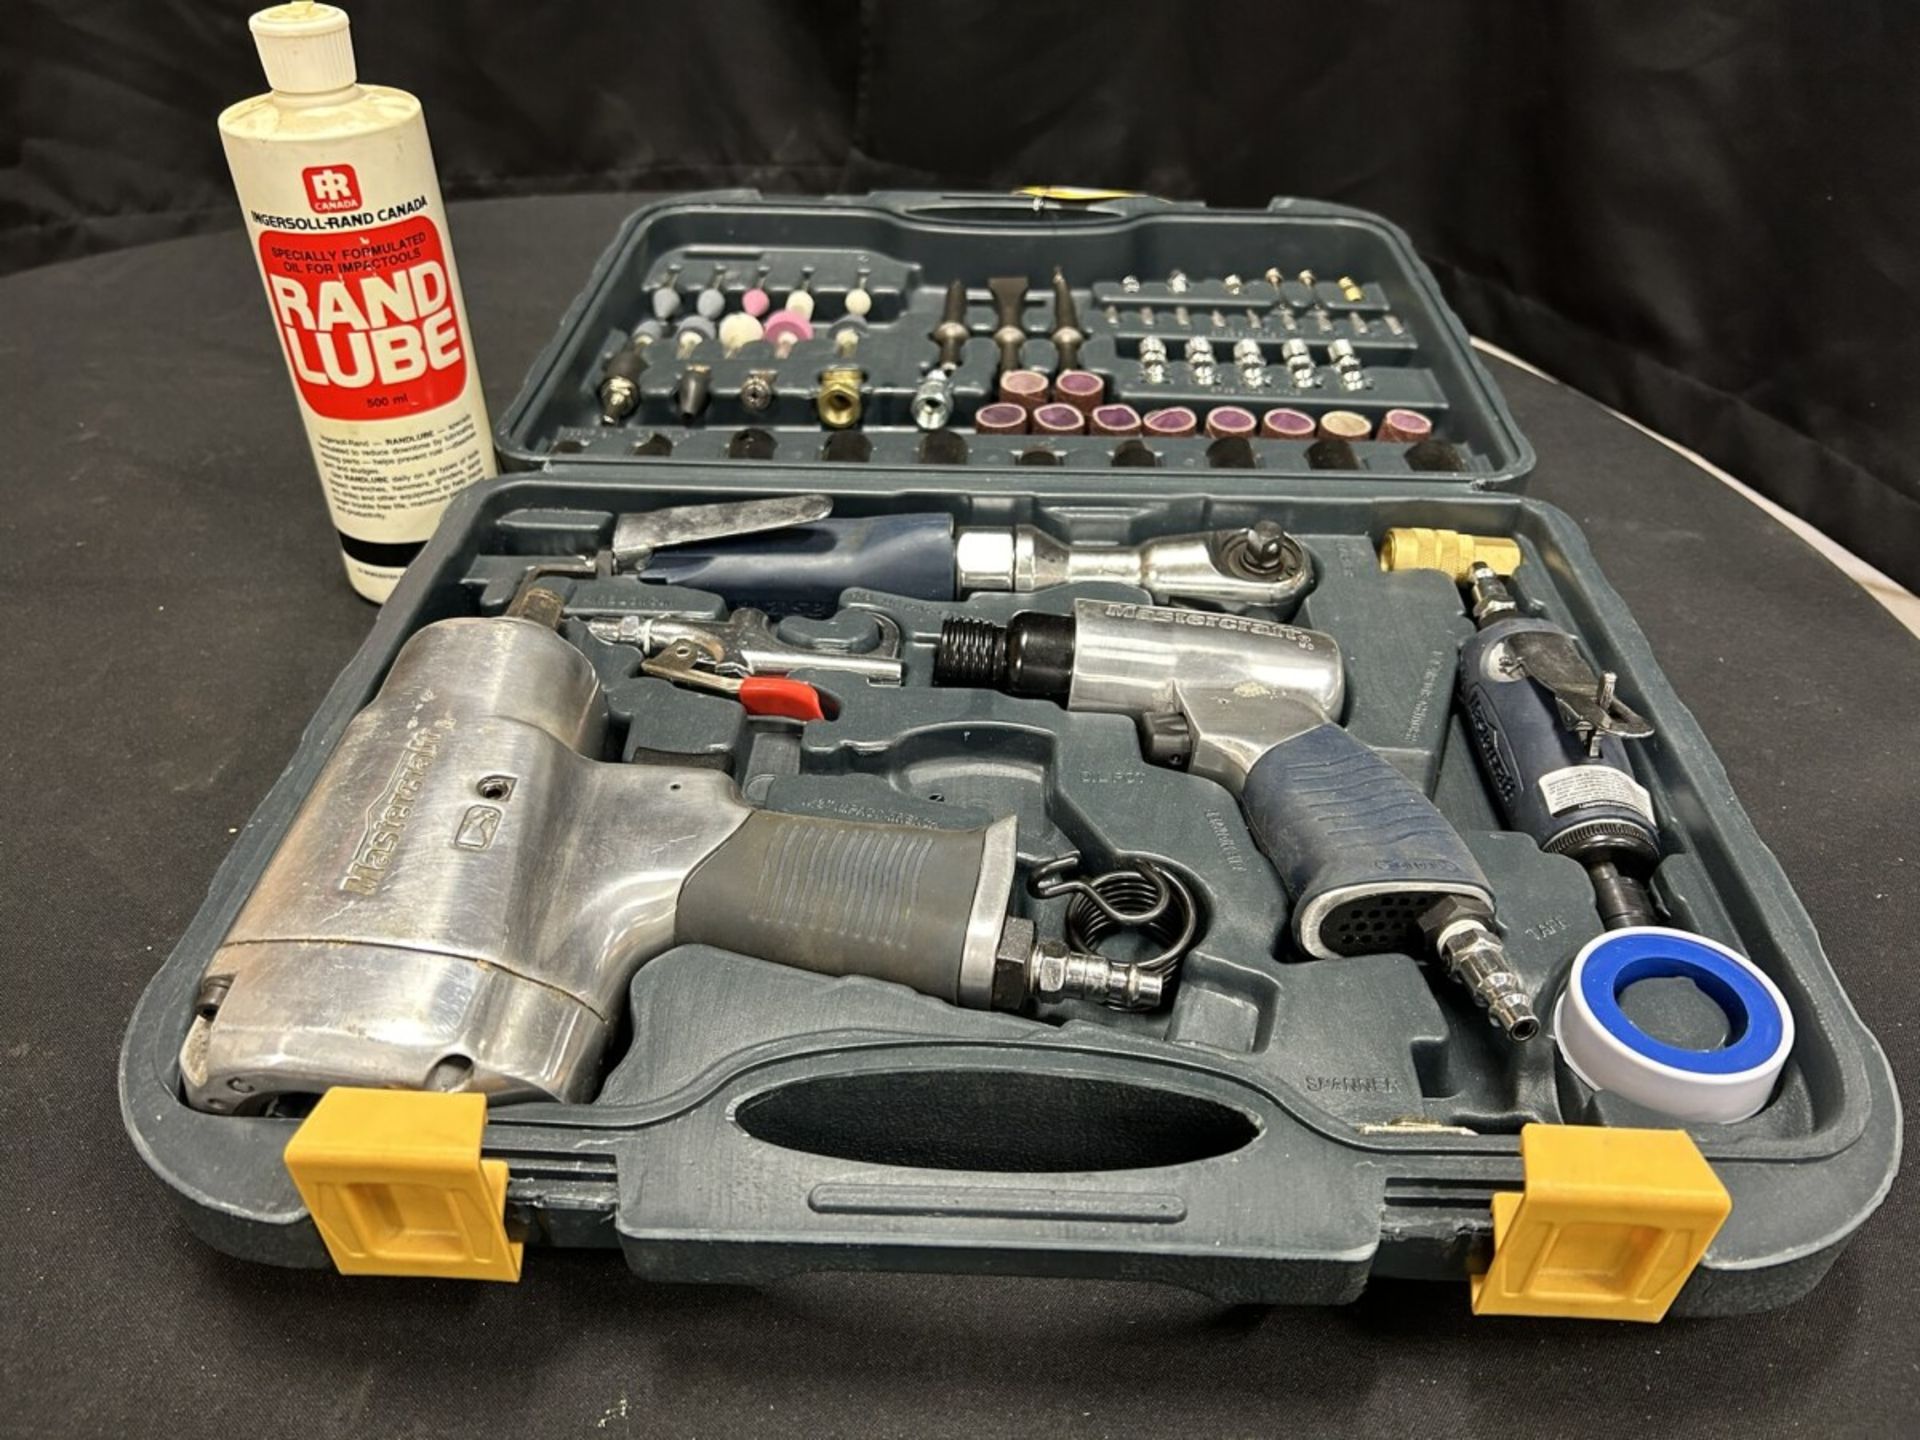 MASTERCRAFT 1/2" PNEUMATIC IMPACT WRENCH & CHISEL W/ POINTS, DRUMS, FITTINGS, ETC.